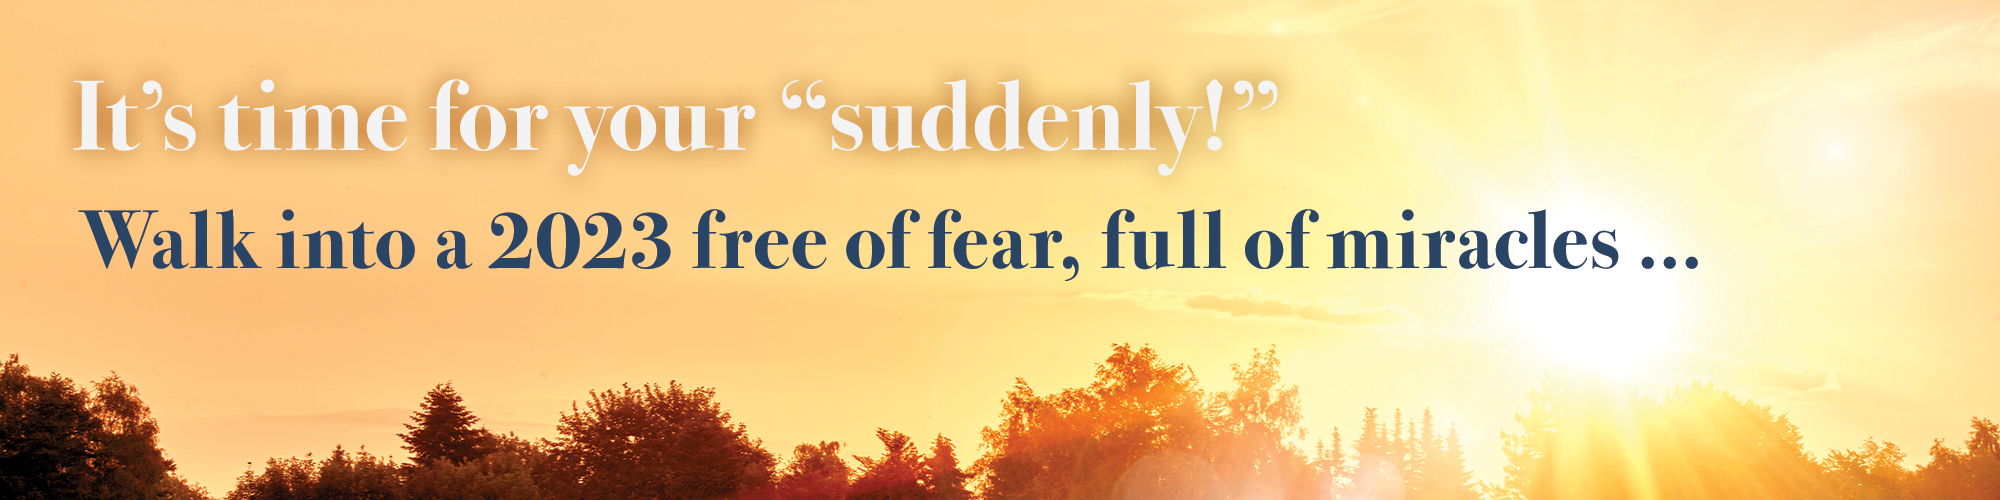 It's Time for Your Suddenly! Walk into a 2023 Free of Fear, Full of Miracles...